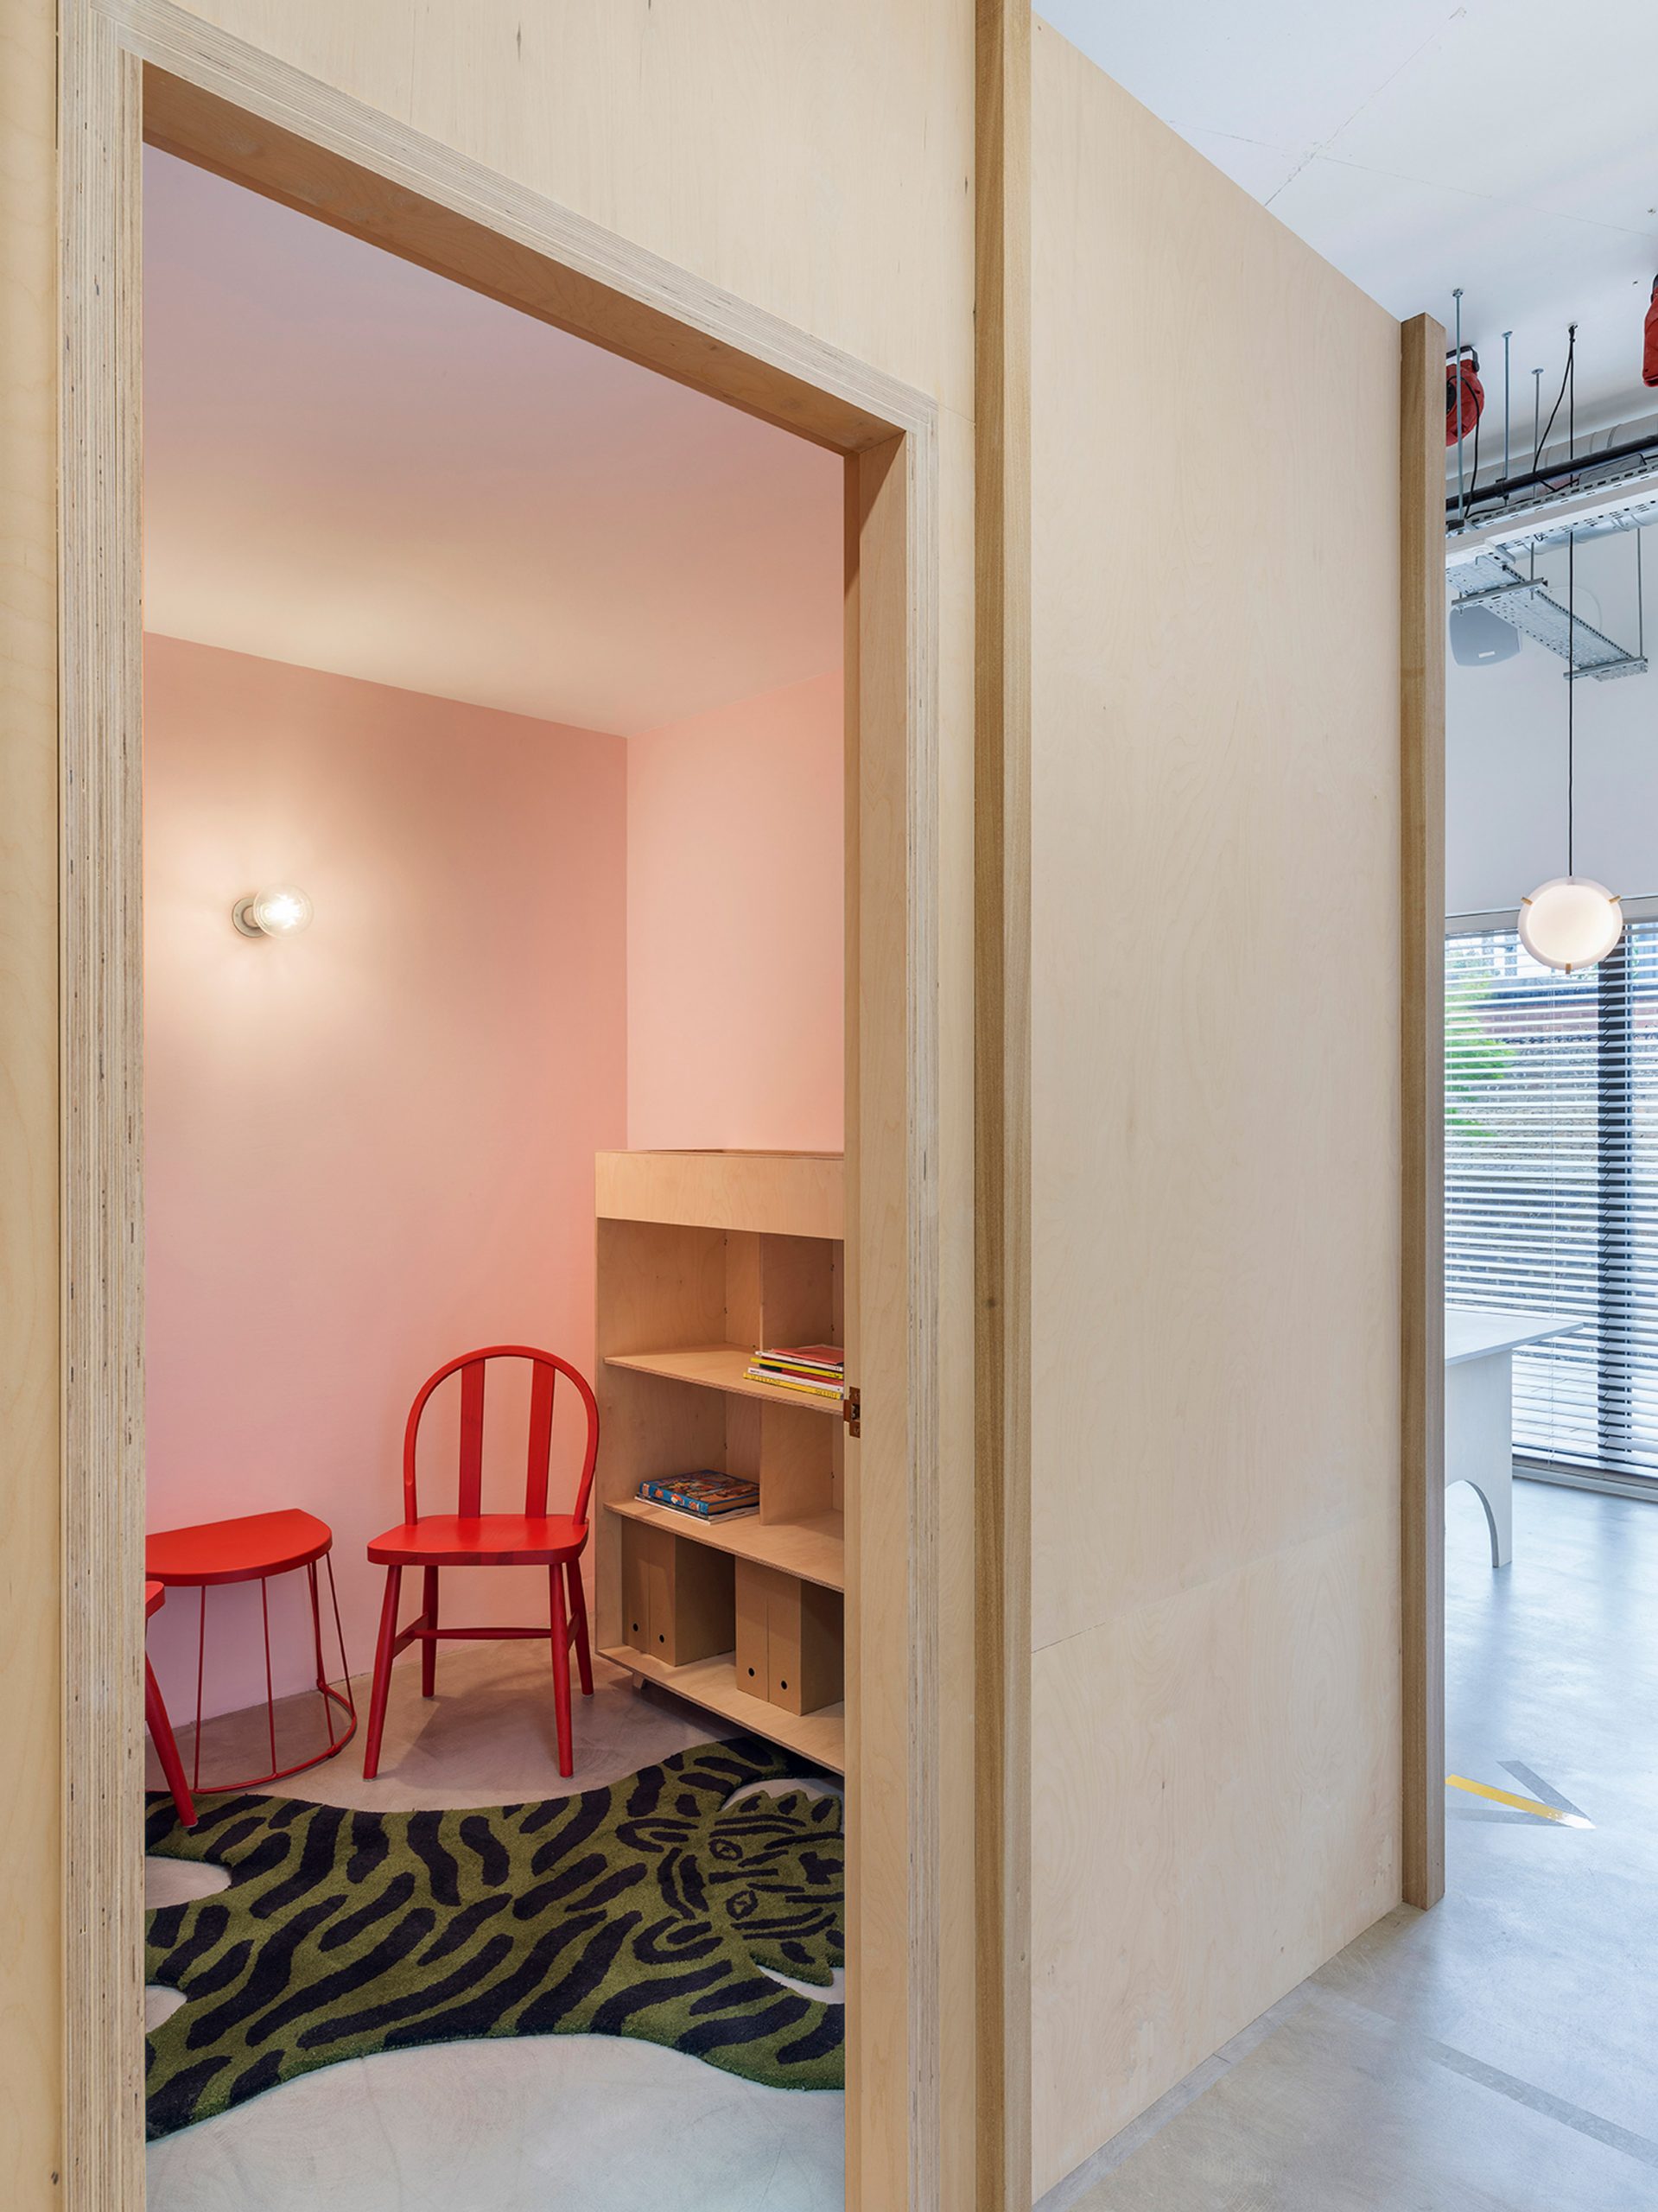 ARC Club co-working office in Homerton, London designed by Caro Lundin